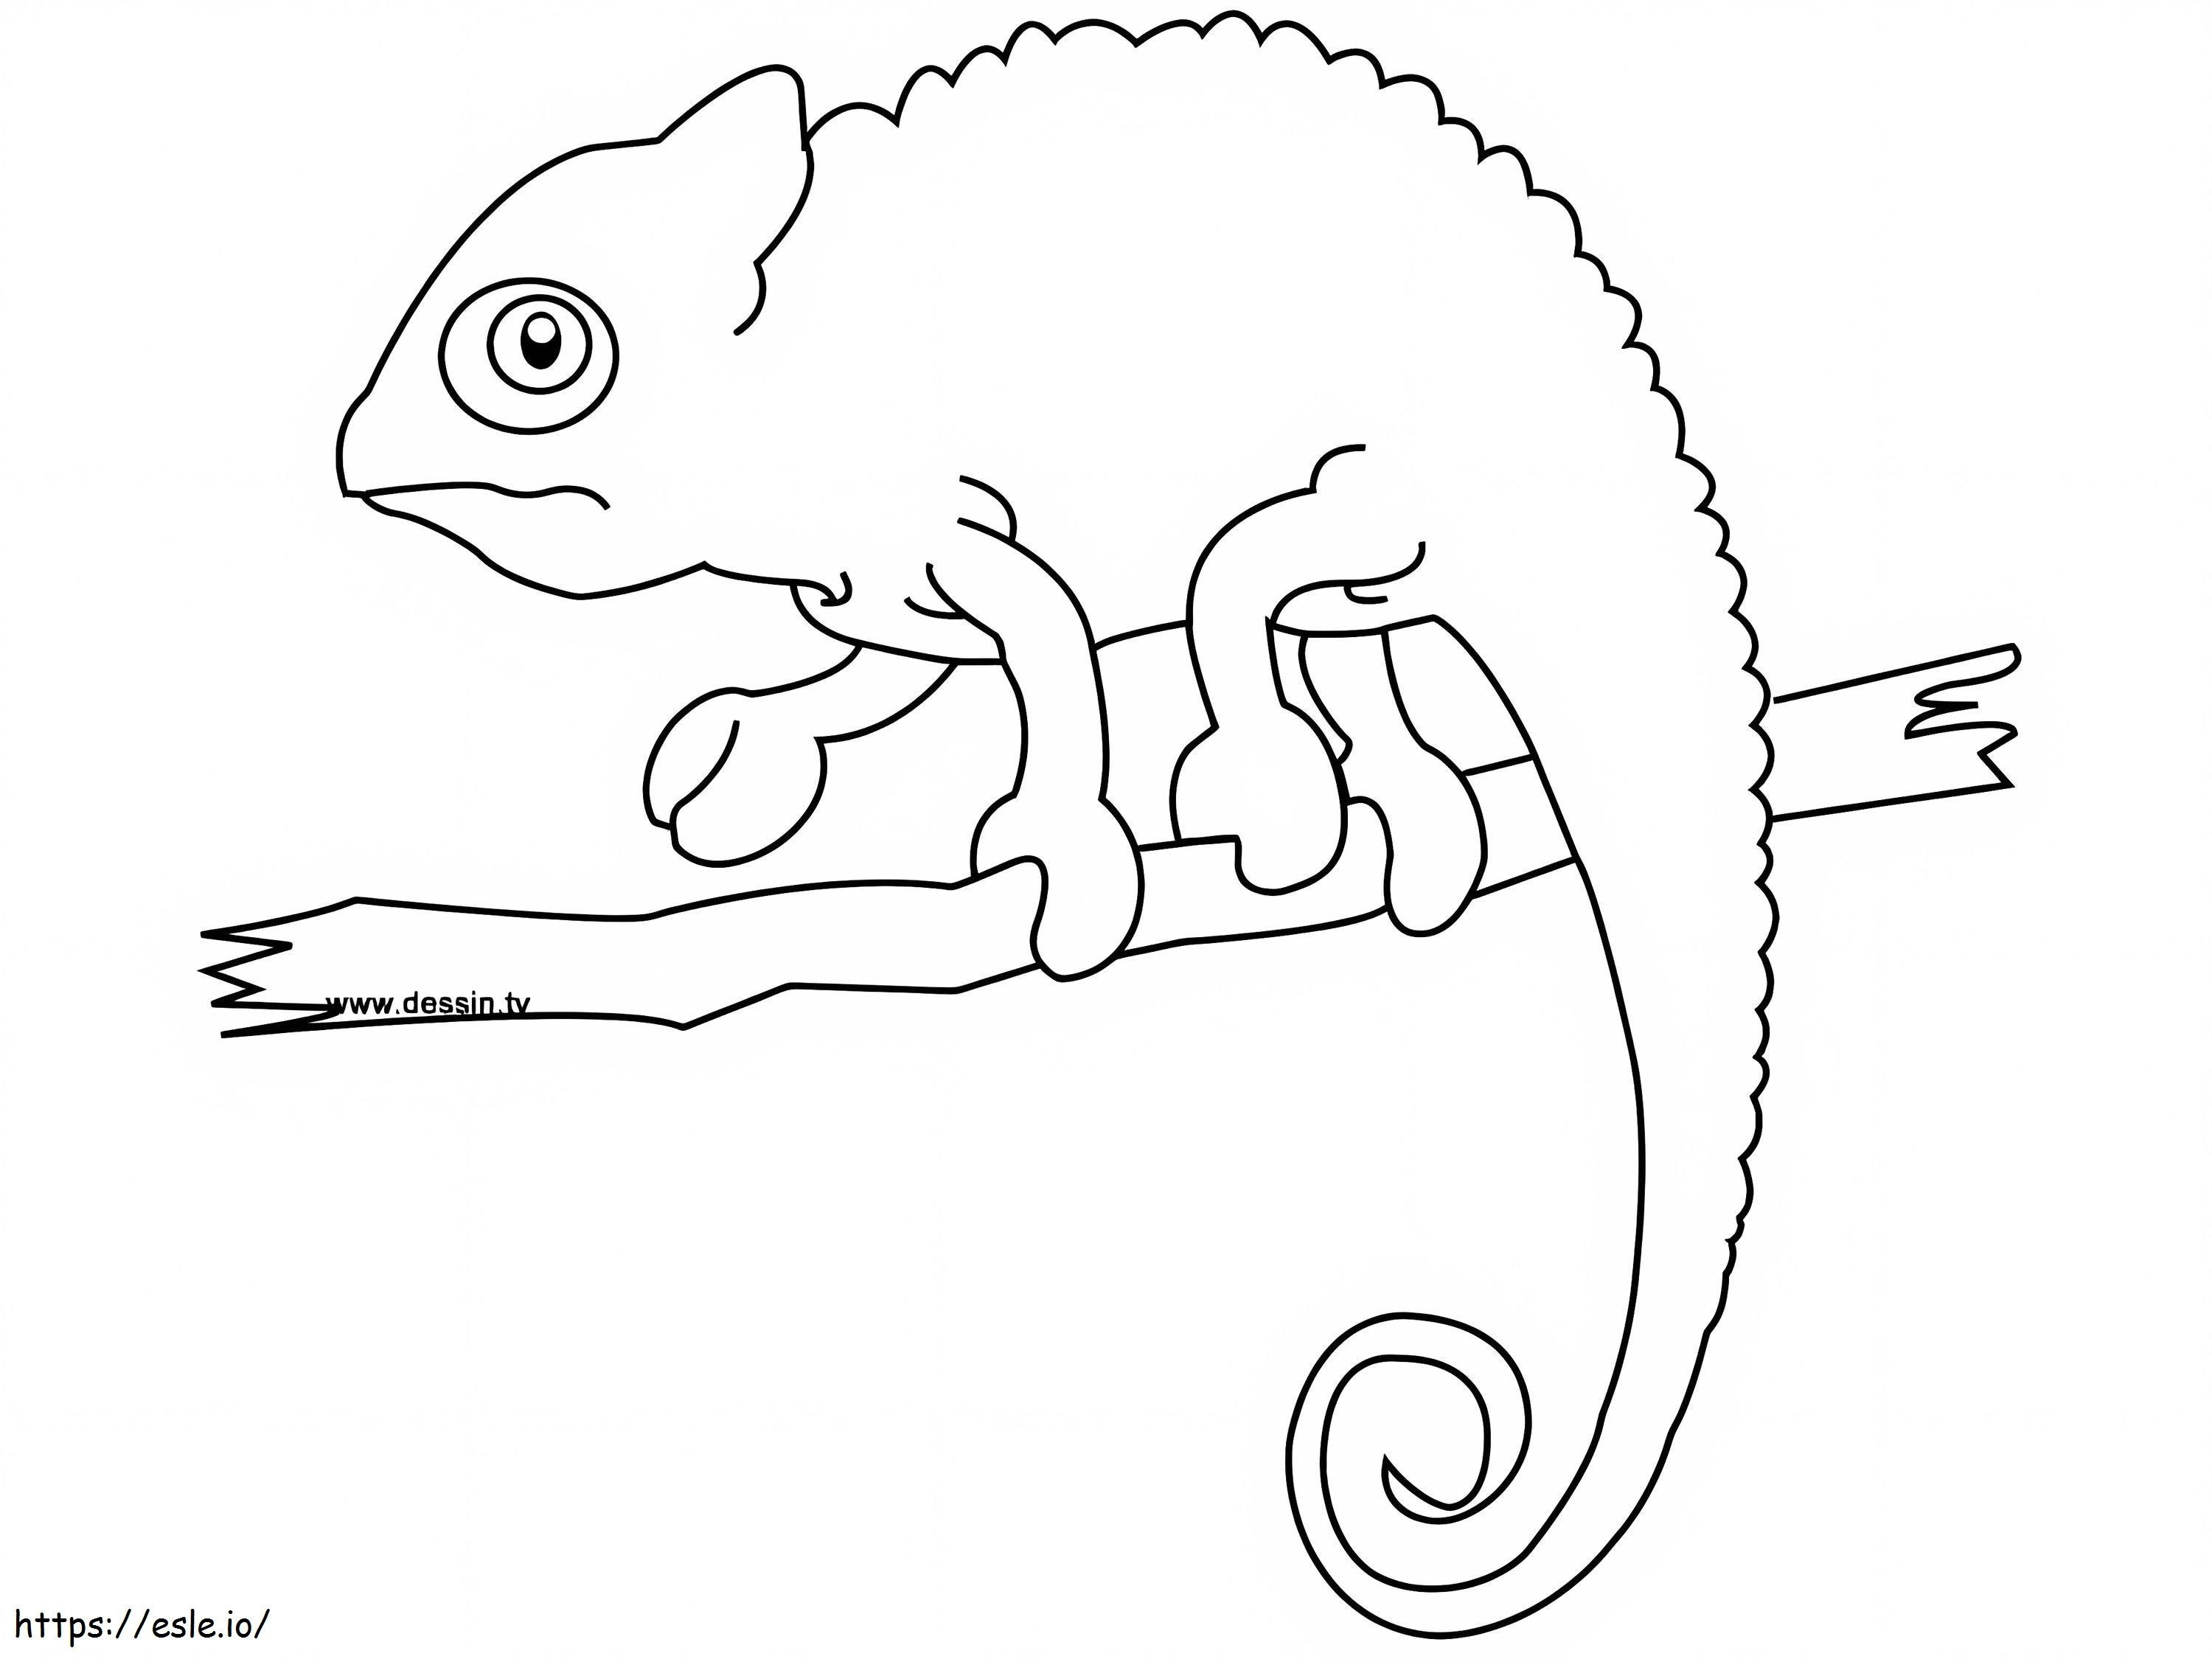 Chameleon Position On Tree Branch coloring page